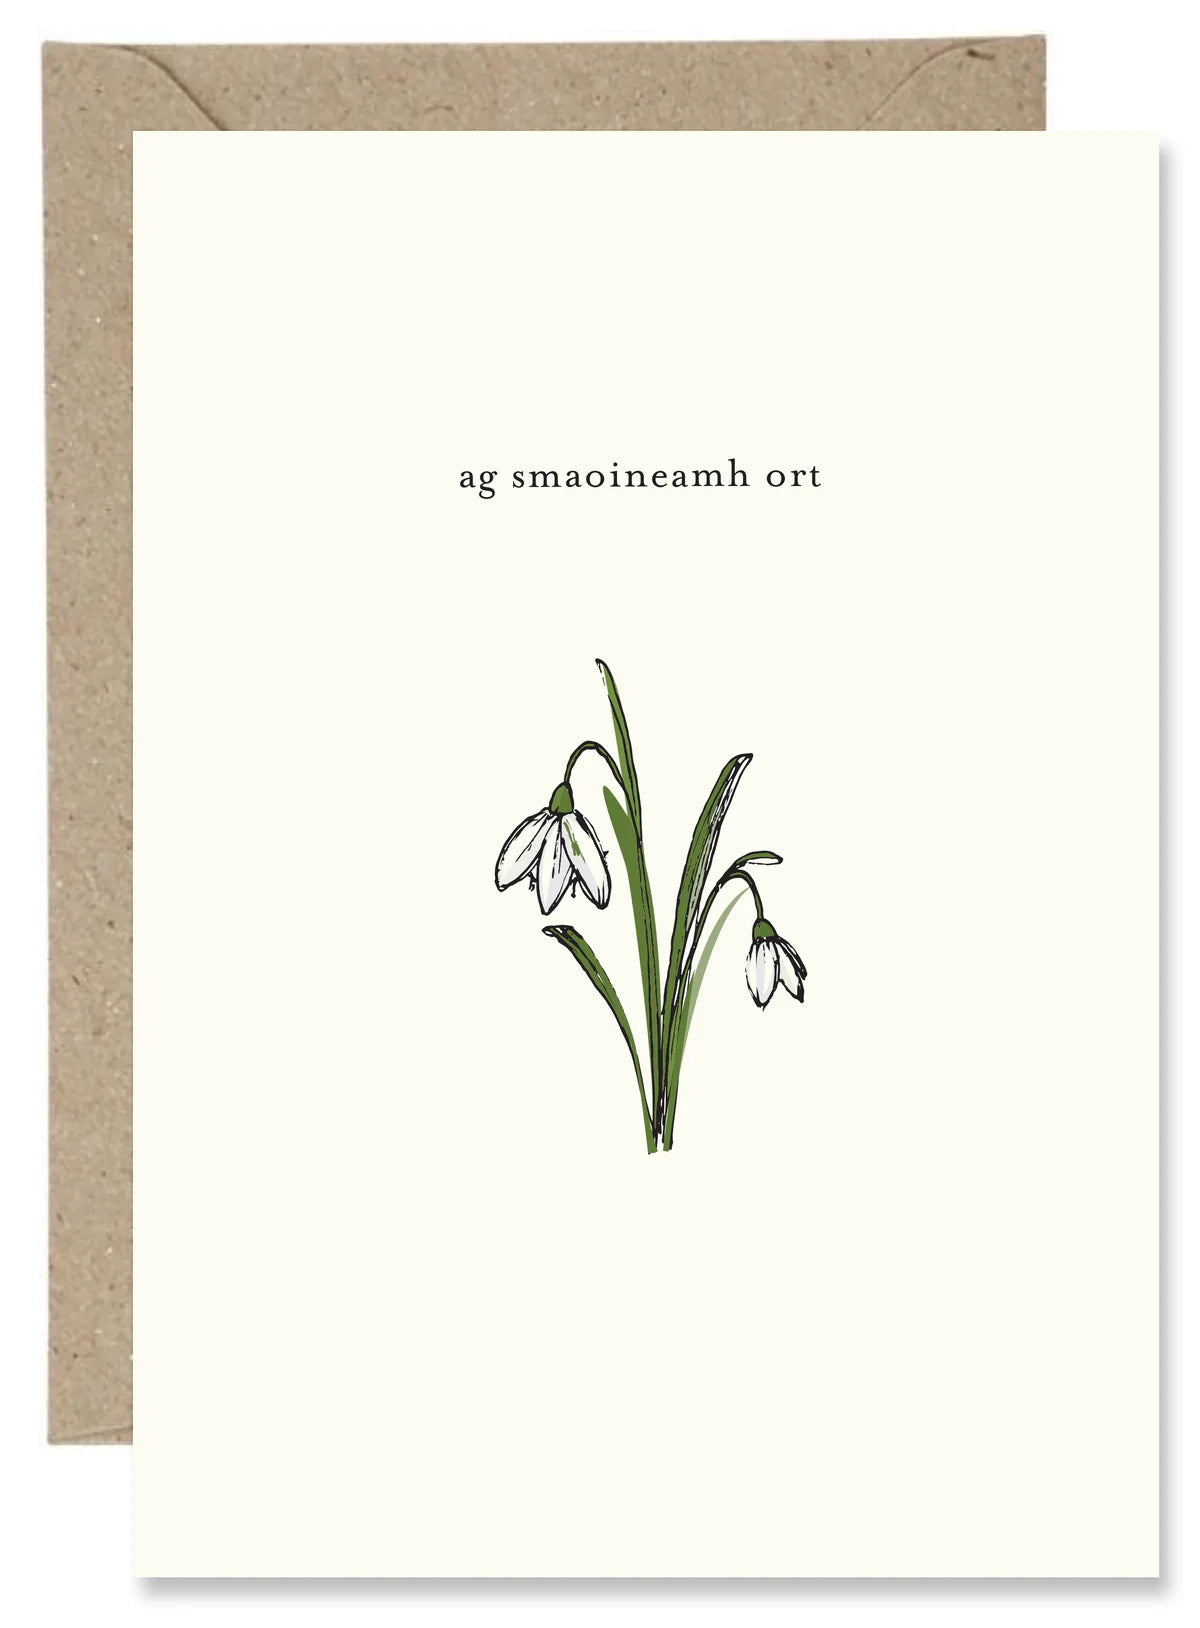 Fabulous Irish Made Greeting Cards The Paper Gull Ag Smaoineamh Ort (Thinking Of You) by Weirs of Baggot Street